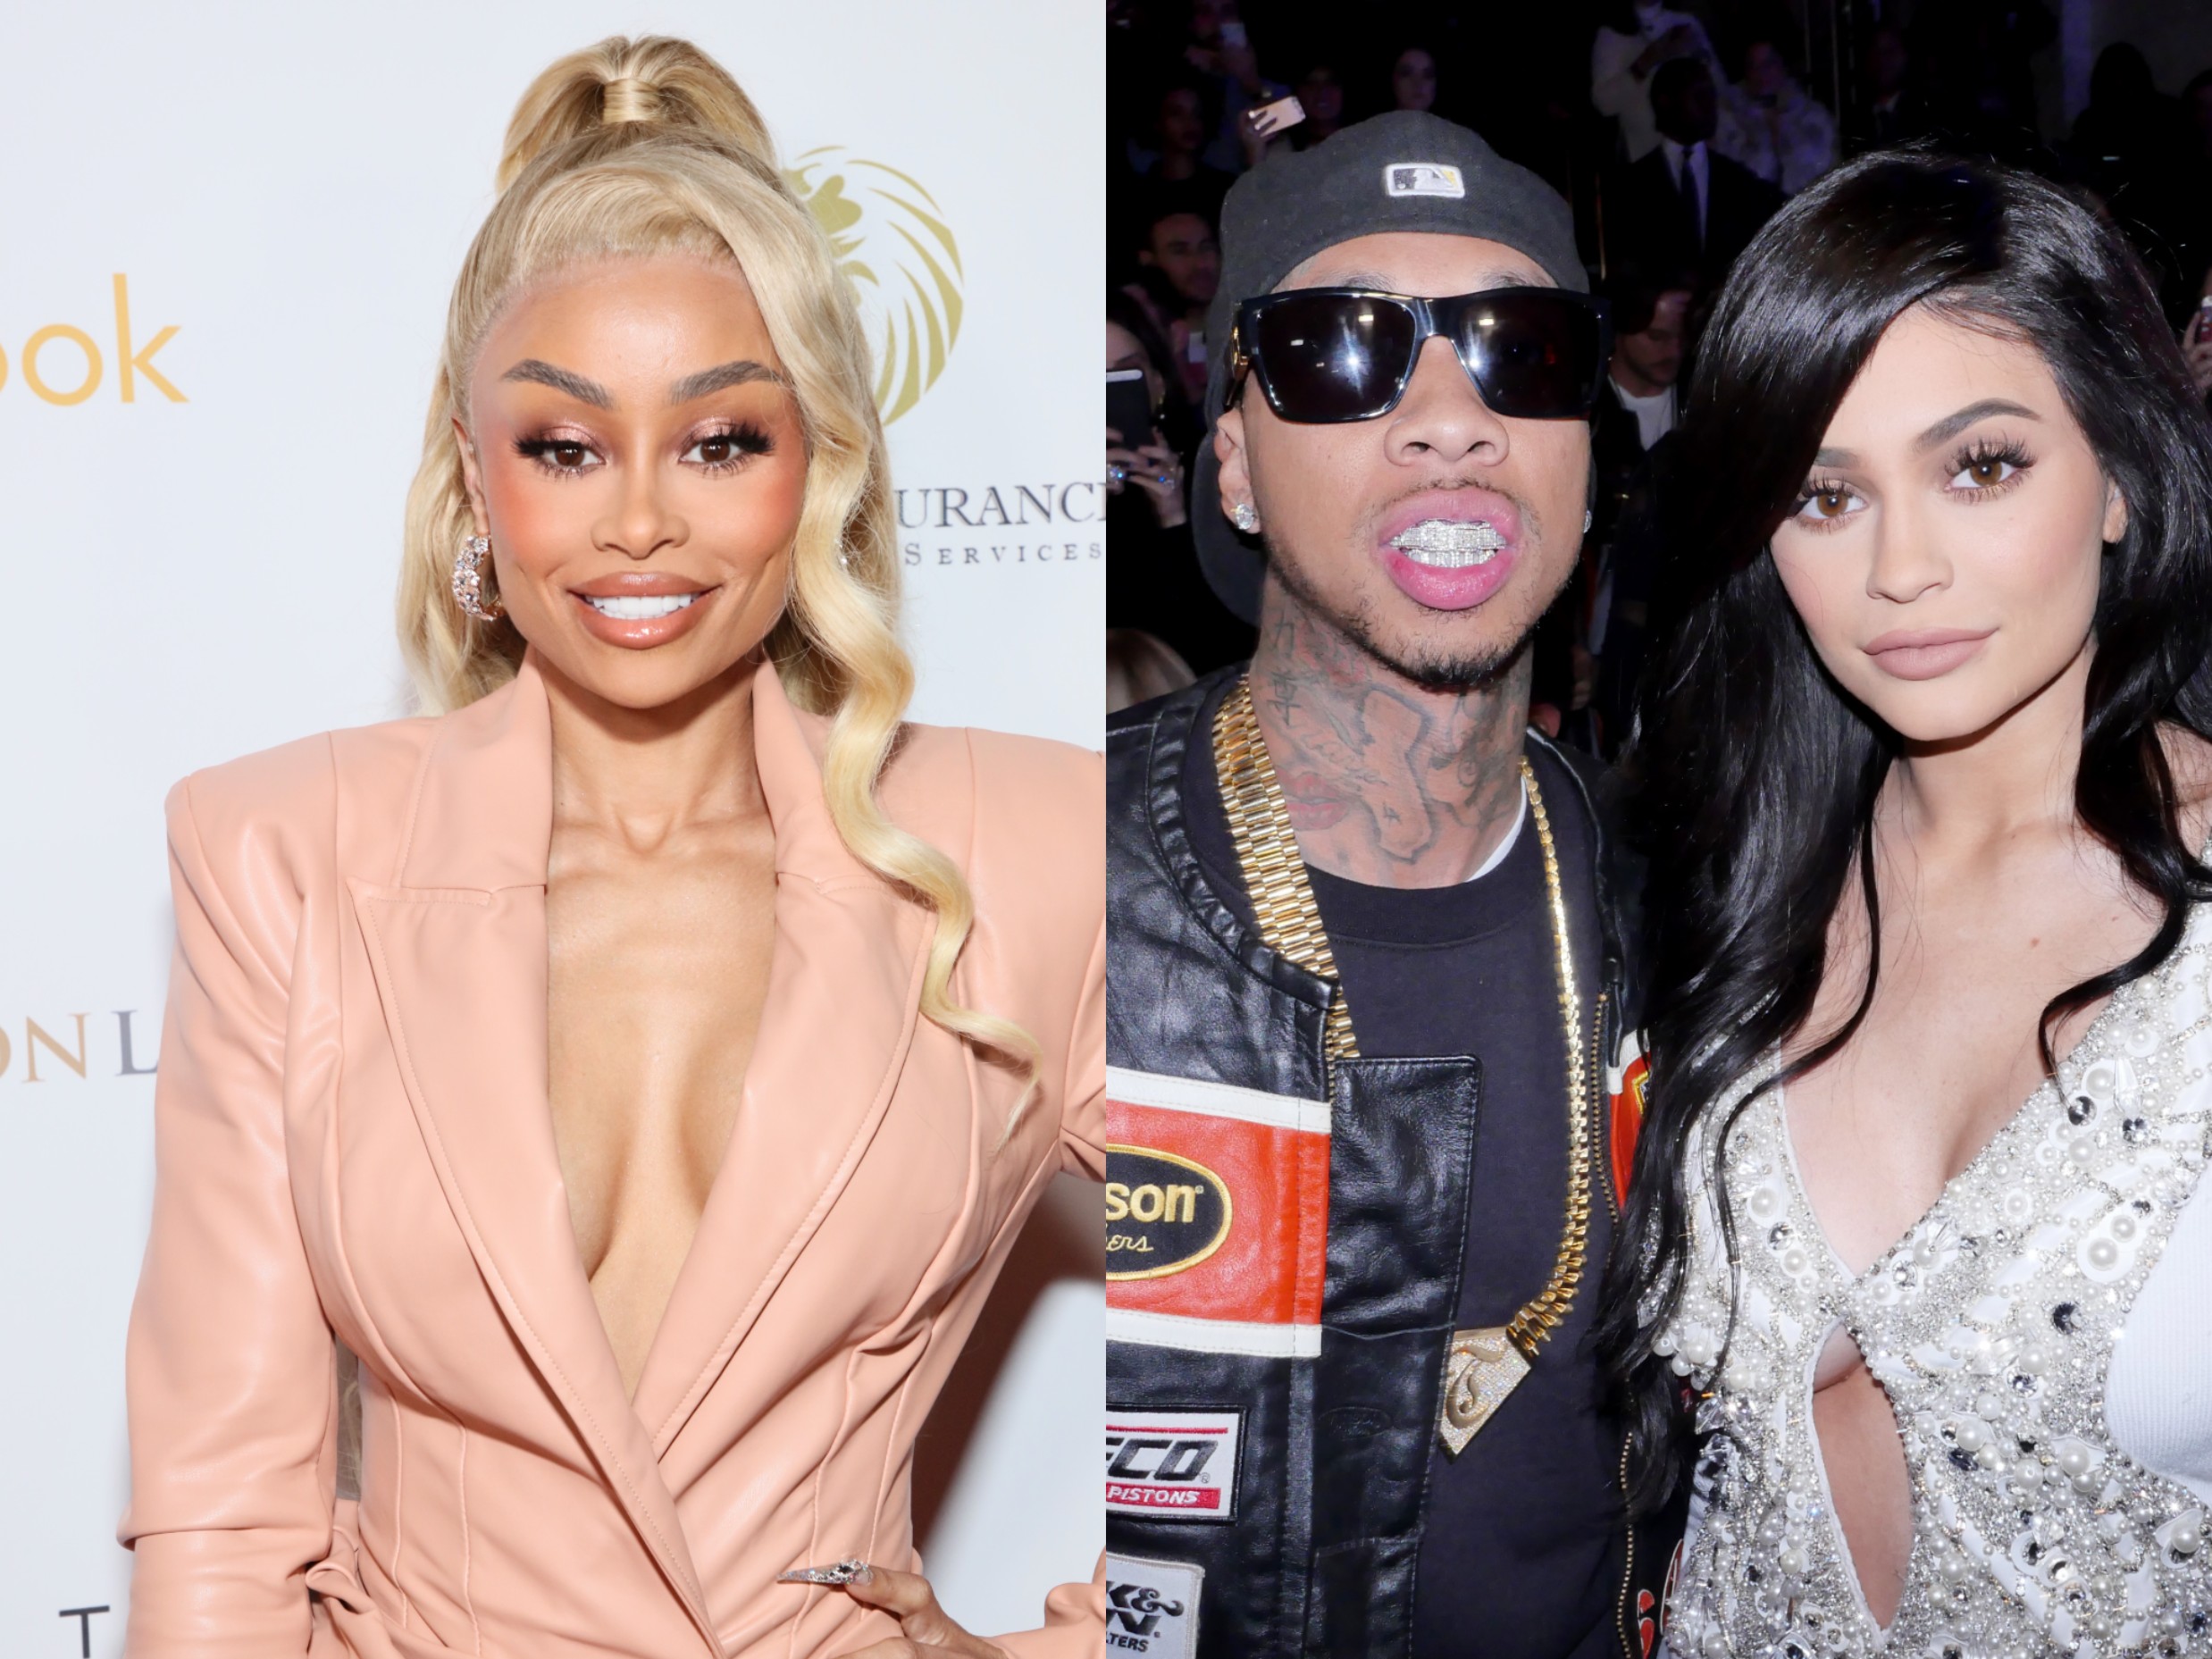 Blac Chyna Discovered Tyga’s ‘Betrayal’ With Kylie Jenner Online, Says Tyga’s Friends Broke Off Engagement By Kicking Chyna Out